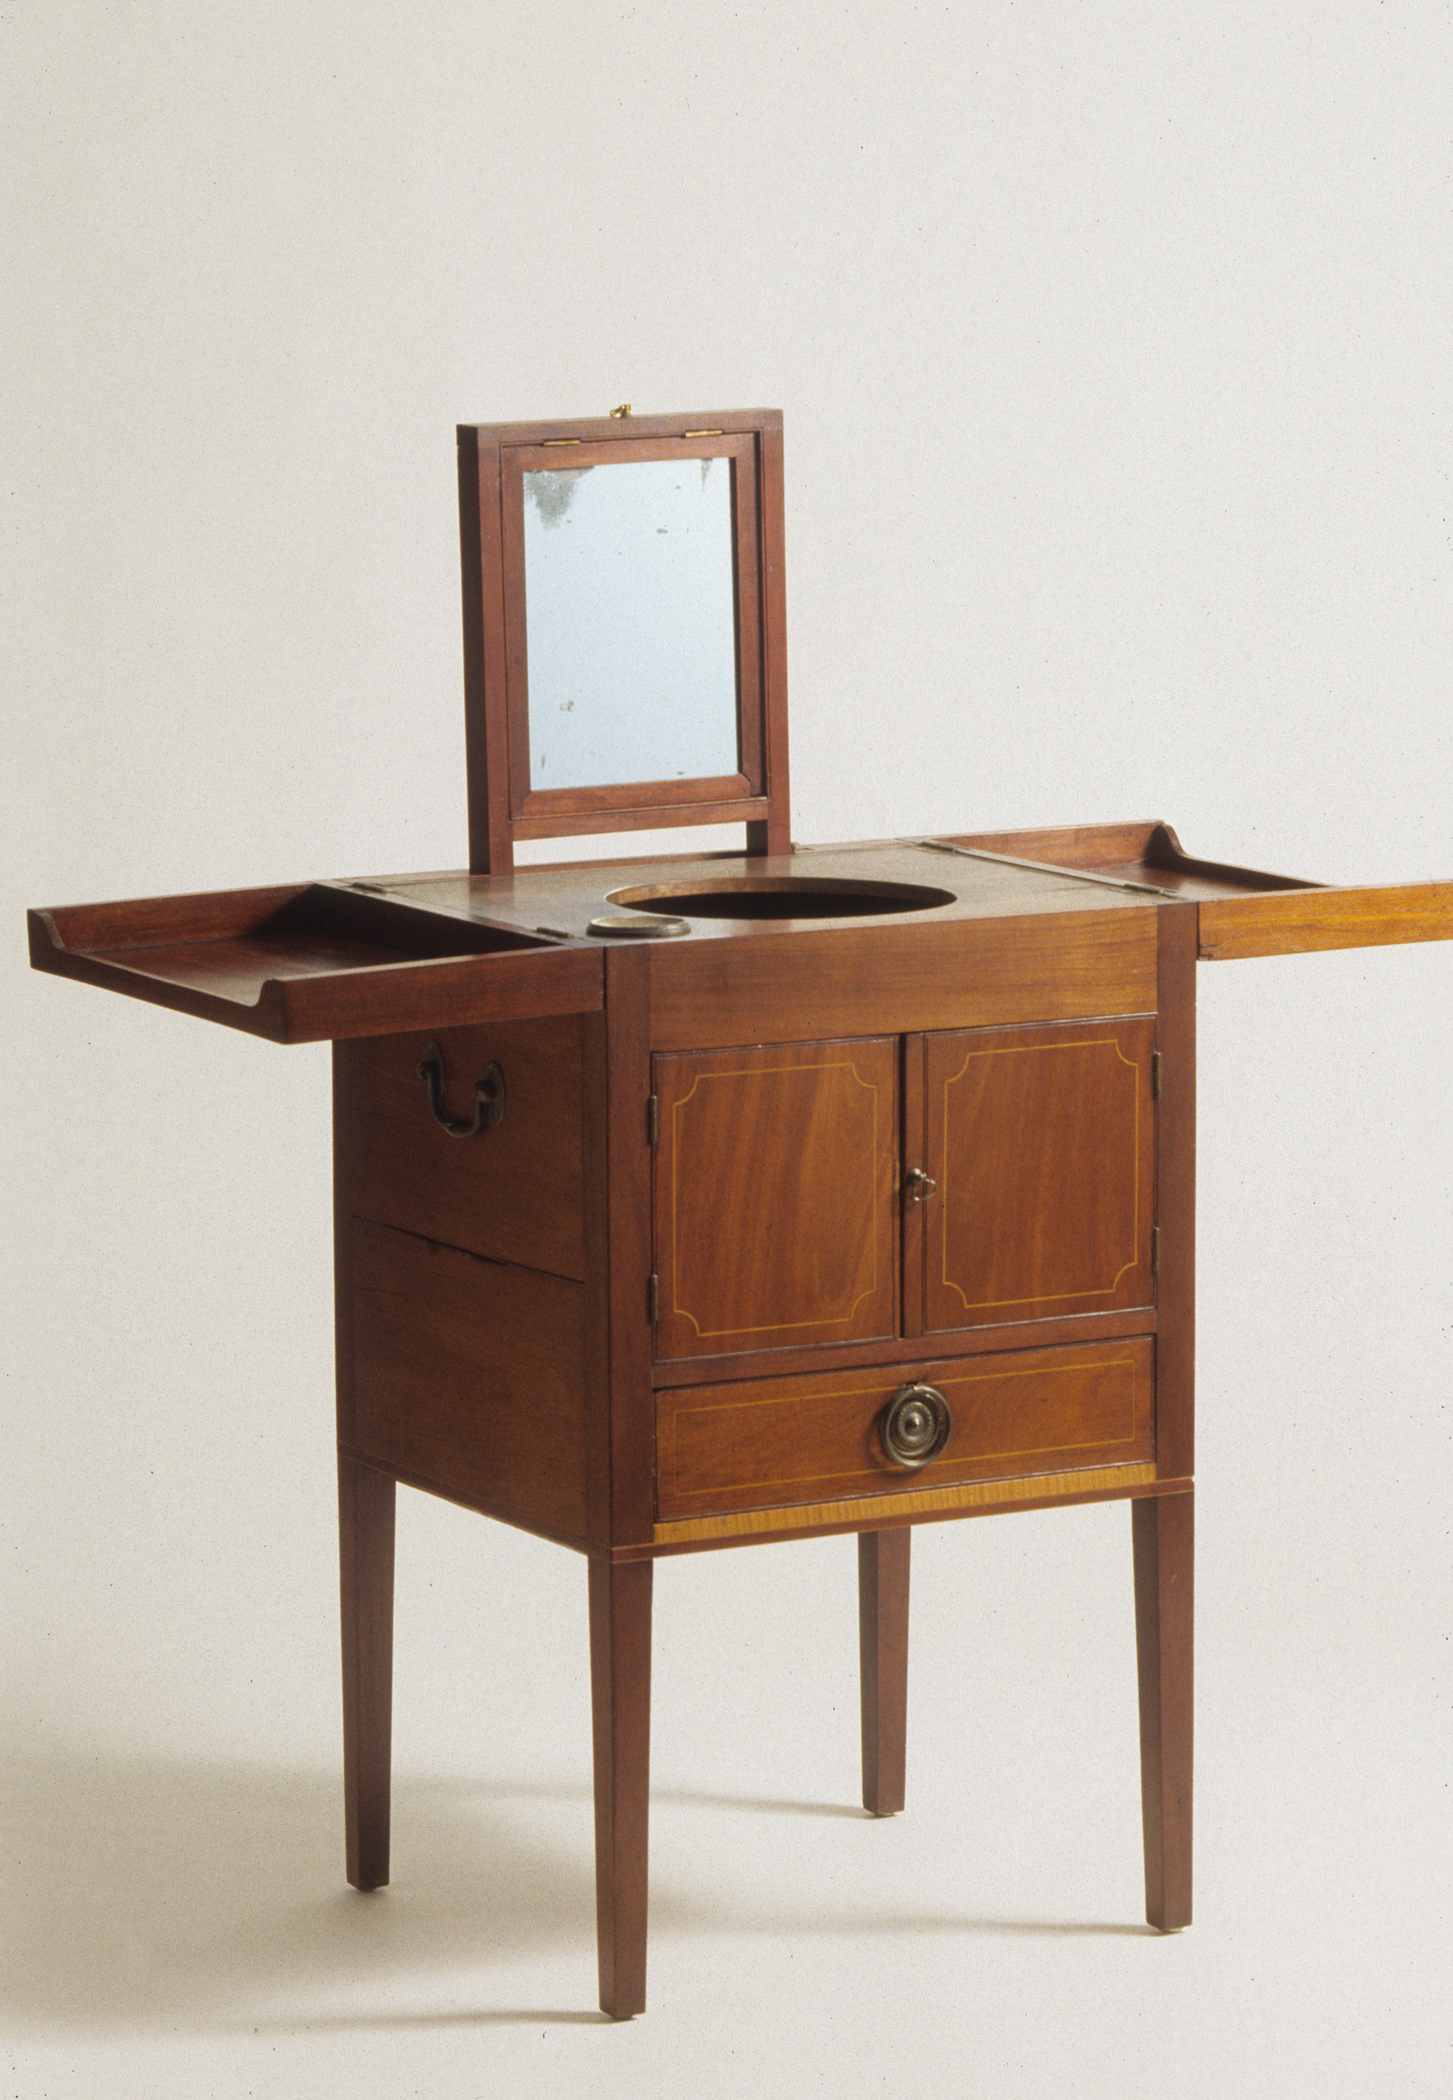 1969.1677 Stand, Wash stand, front view 1